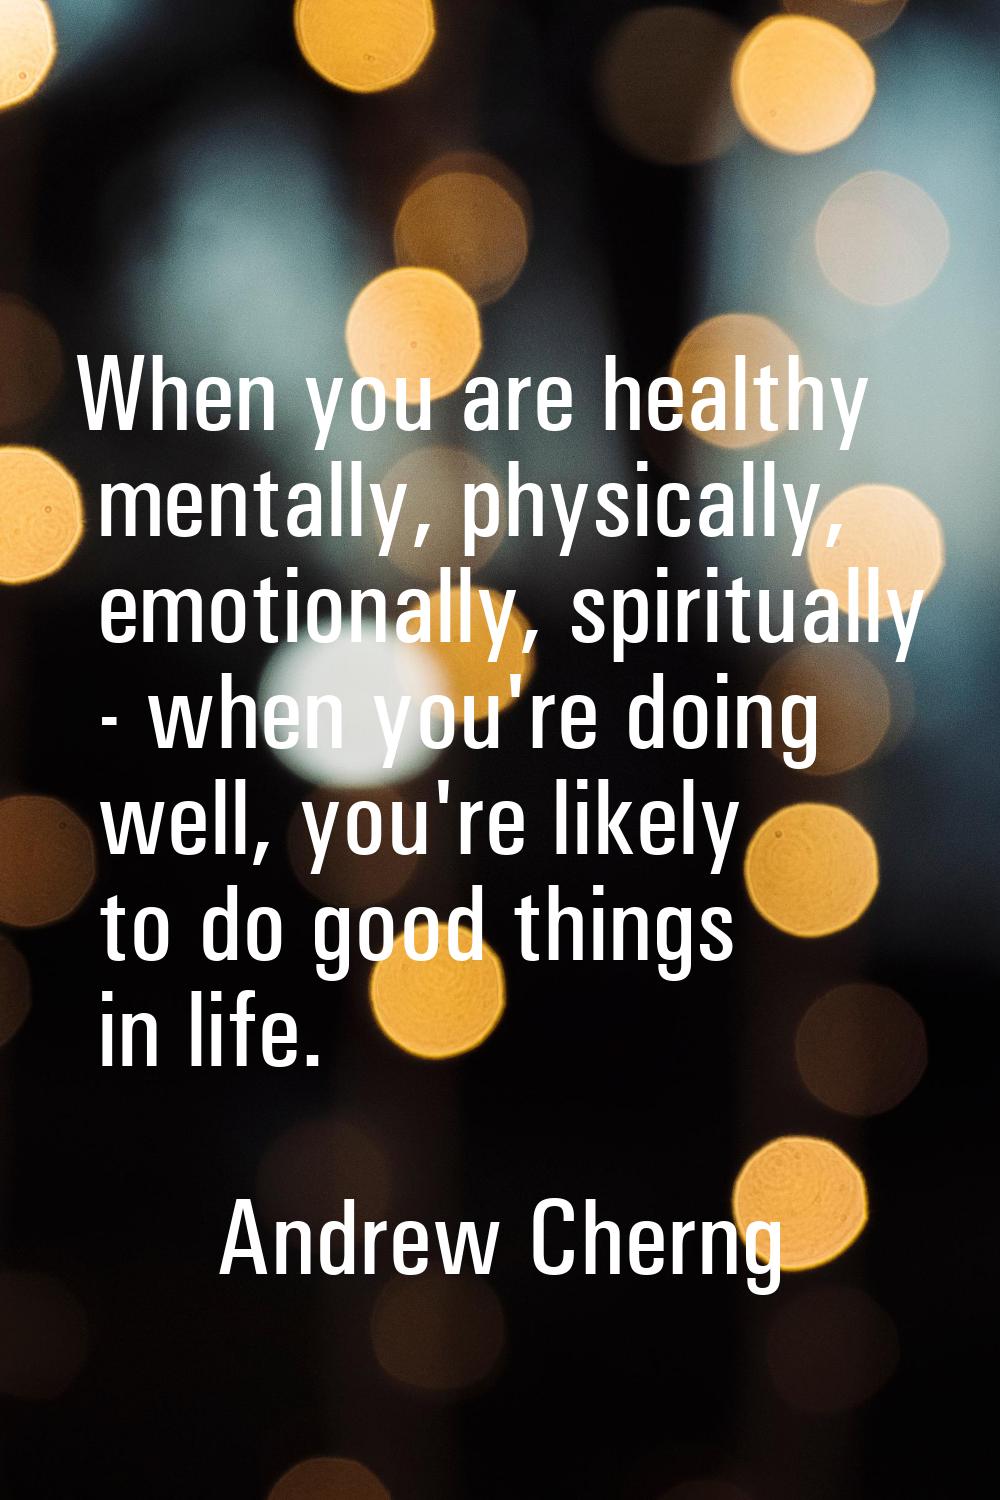 When you are healthy mentally, physically, emotionally, spiritually - when you're doing well, you'r